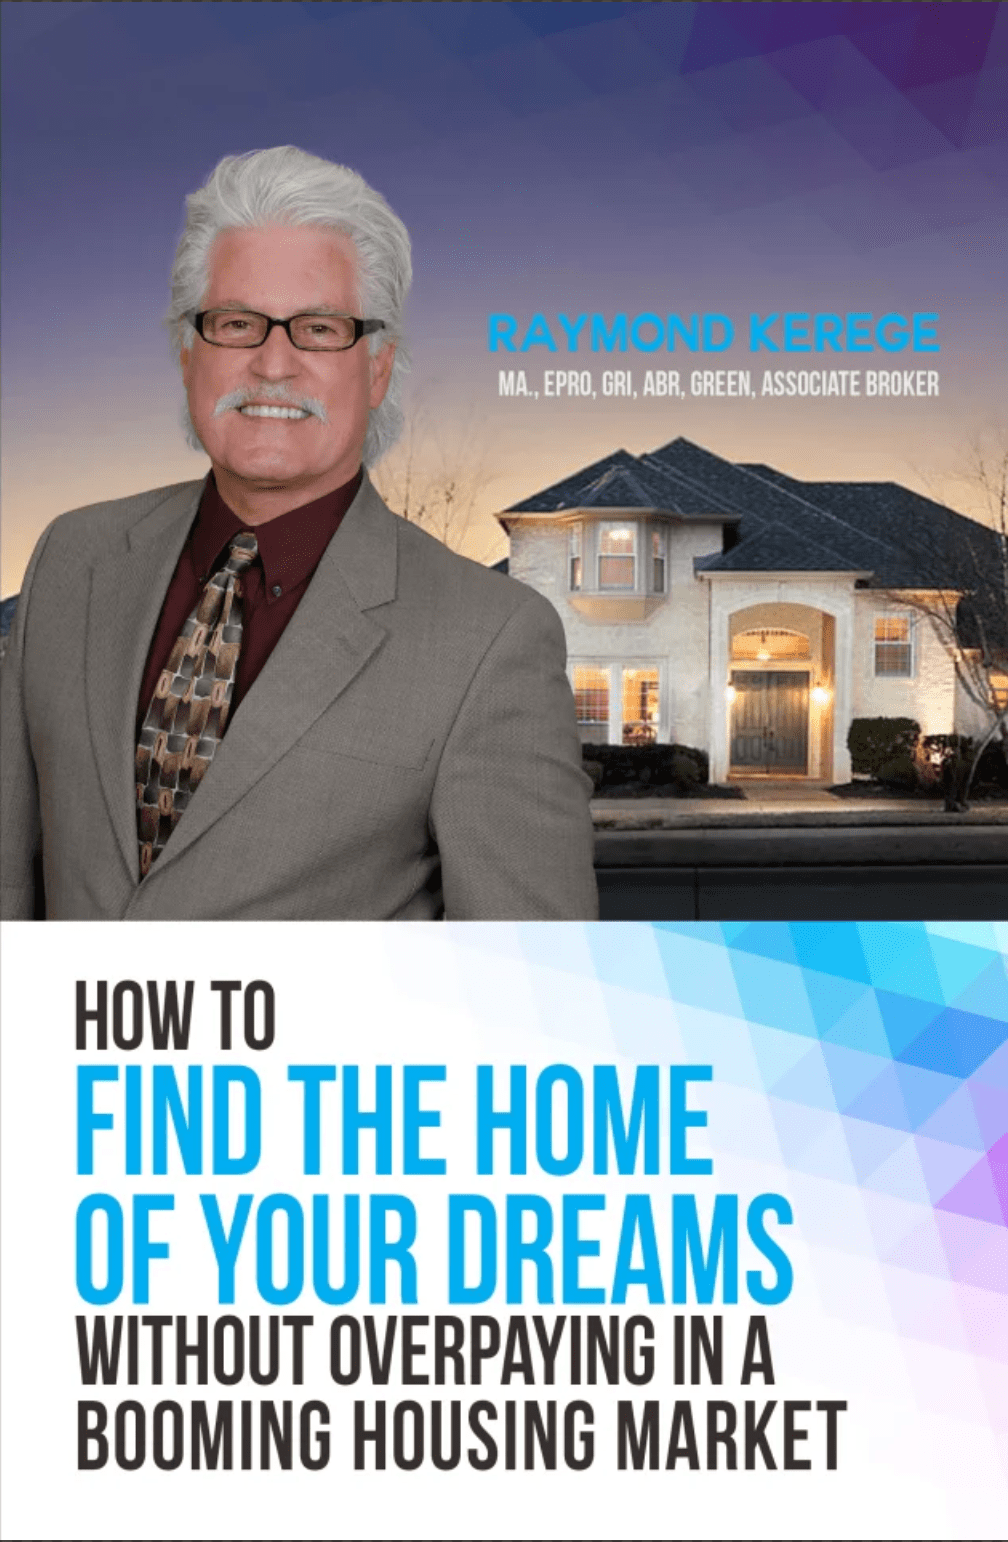 How To Find The Home Of Your Dreams Without Overpaying In A Booming Housing Market